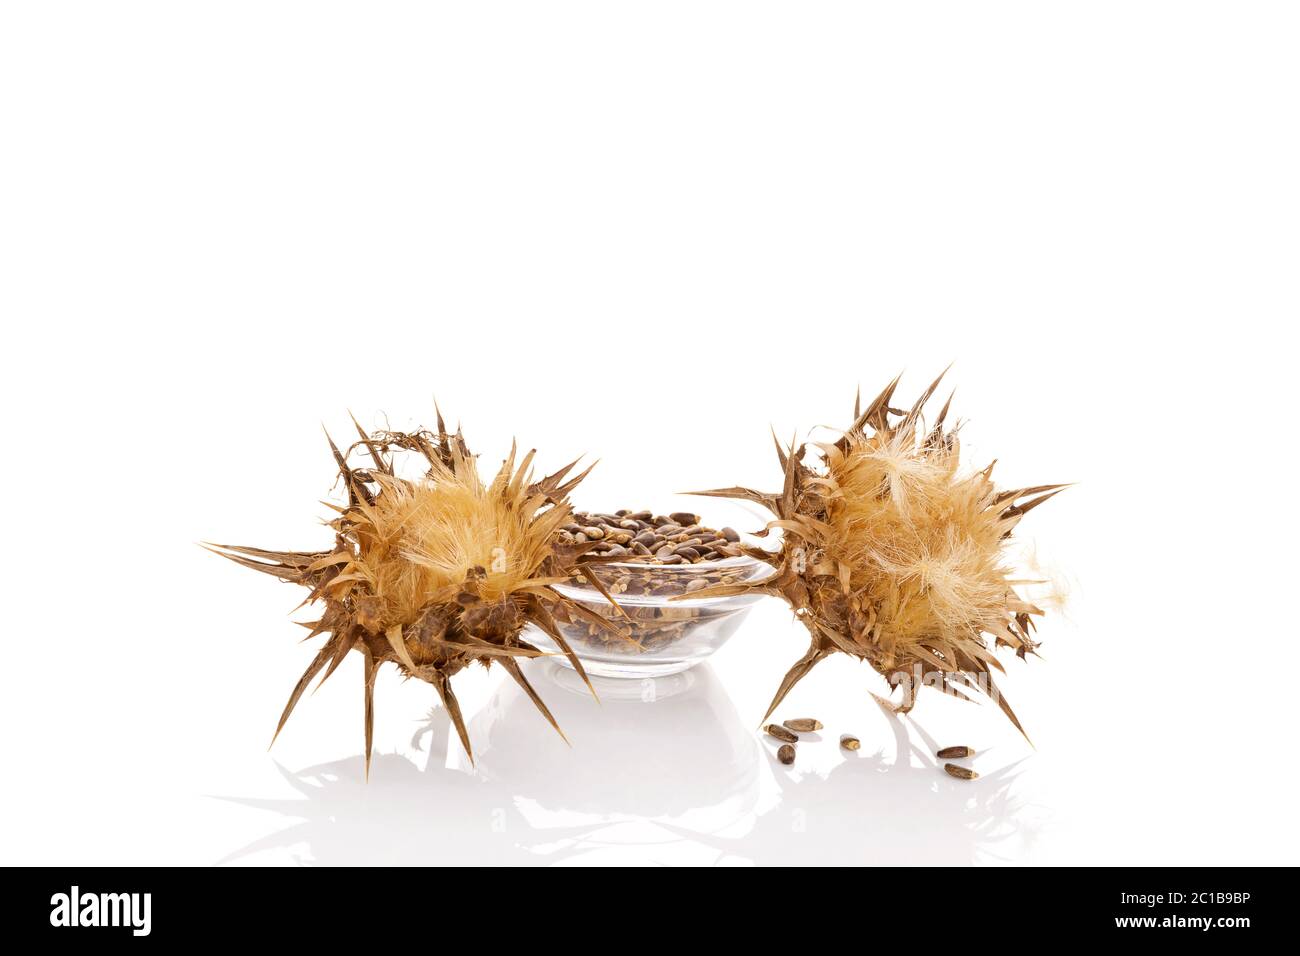 Dried Milk Thistle flowers with seeds. Stock Photo